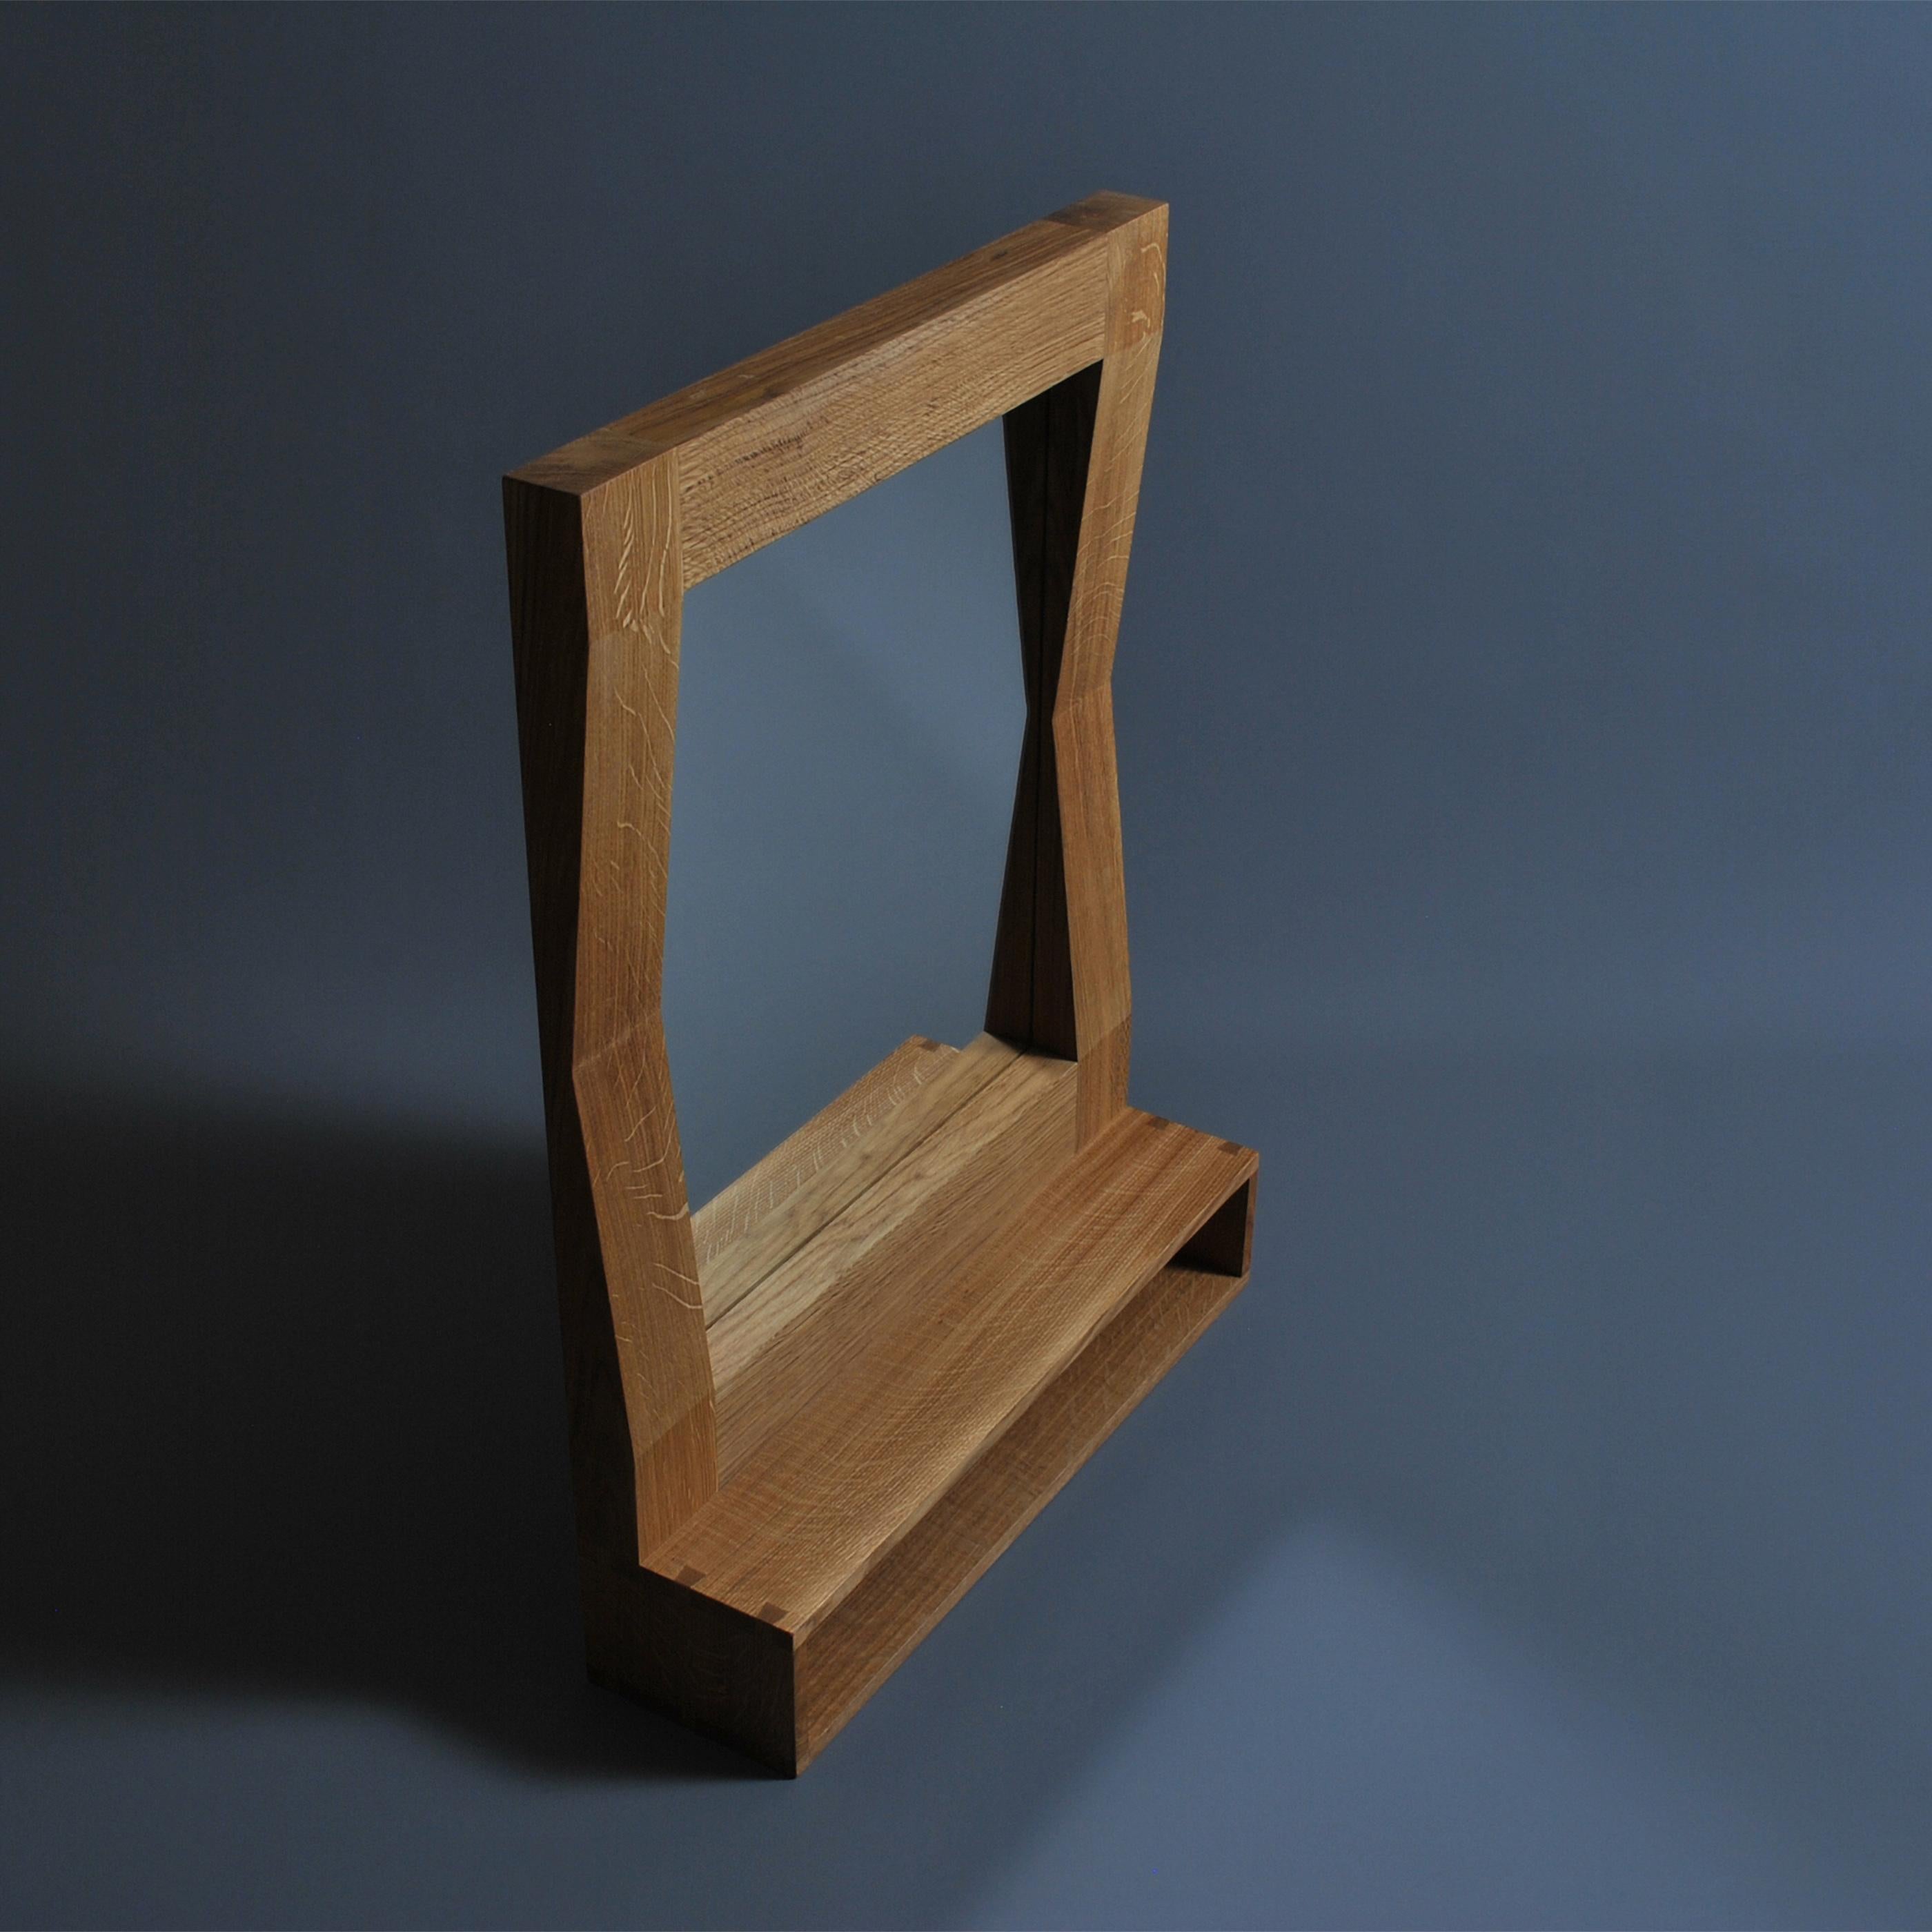 Large handcrafted ‘furrow’ oak framed mirror with shelf. Designed by SUM furniture and handcrafted using traditional techniques in finest fully quarter sawn English oak. Hand finished in natural oils. The furrow mirror holds a striking presence and